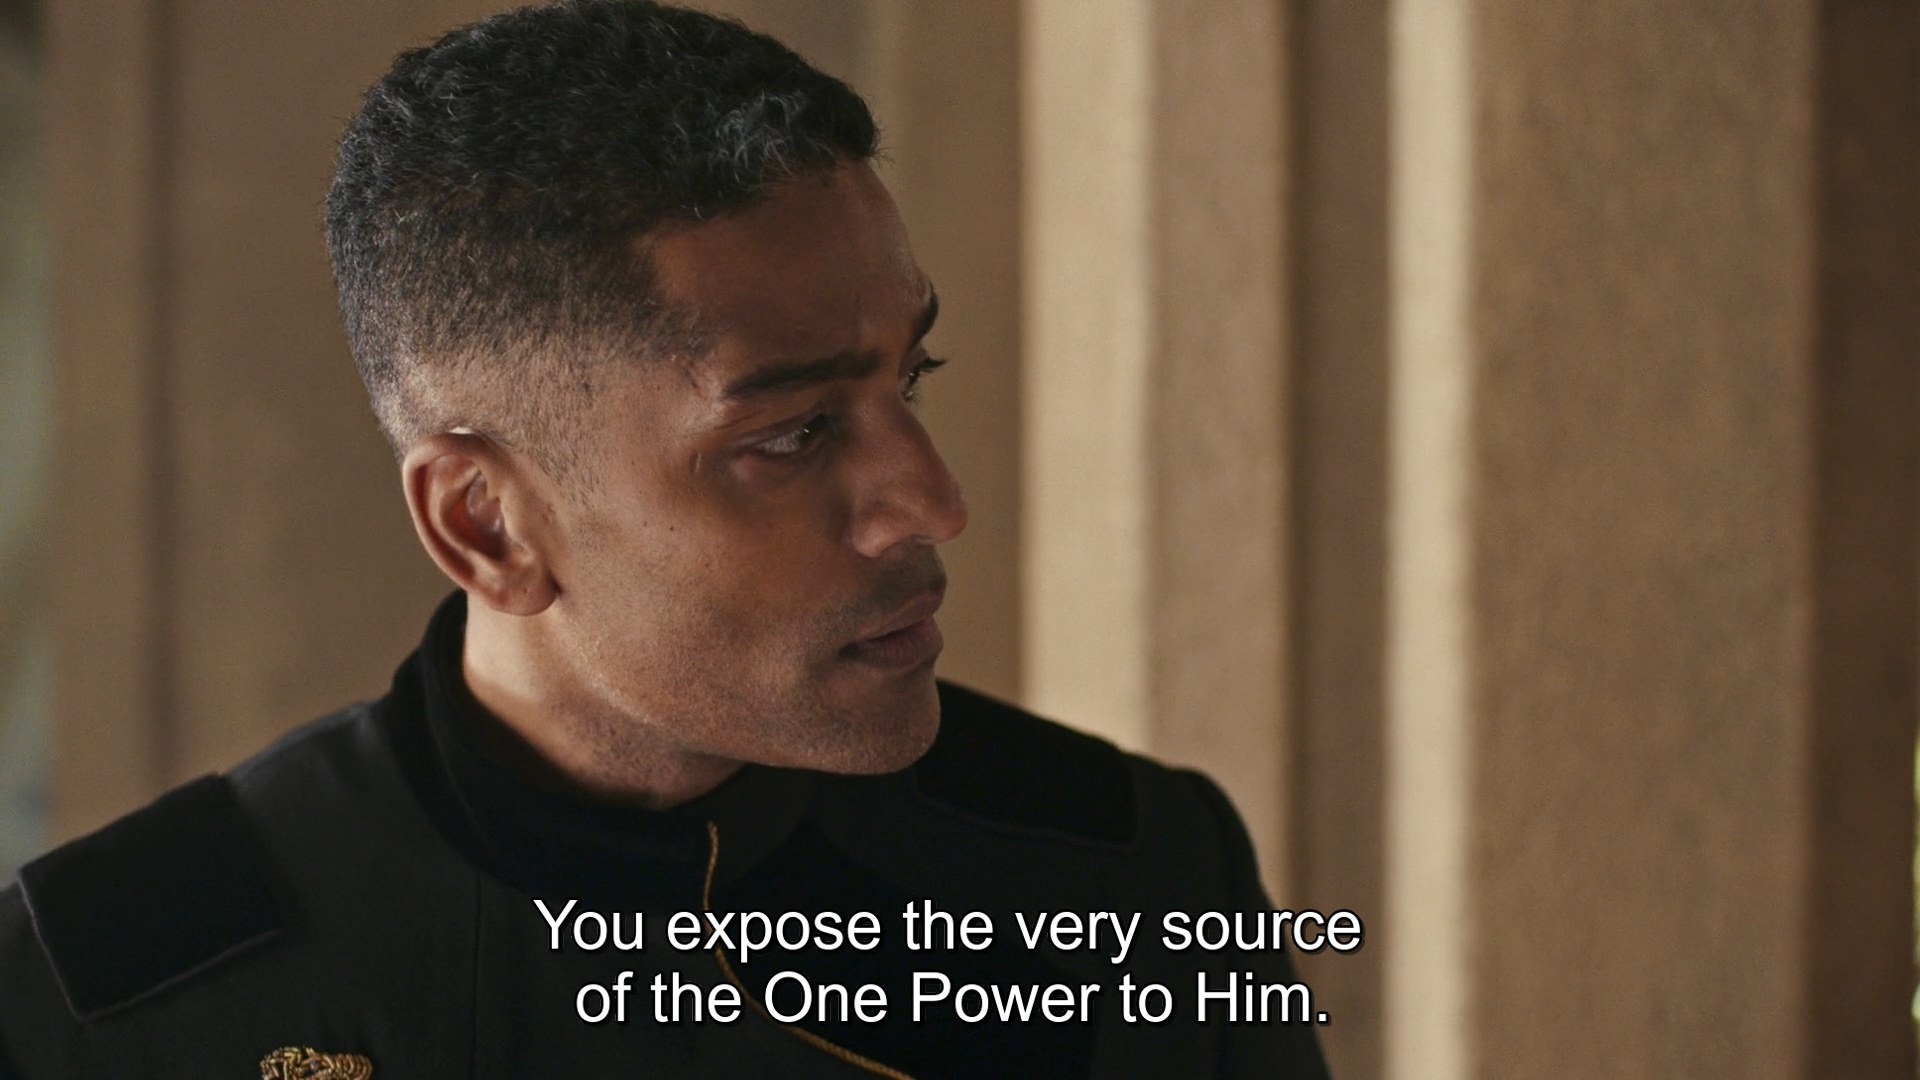 A close-up shot of Lews Therin Telamon (Alexander Karim), the Dragon in the Age of Legends, in a black uniform. The subtitles, translated from the Old Tongue, reads “You expose the very source of the One Power to Him”, words spoken by Latra.